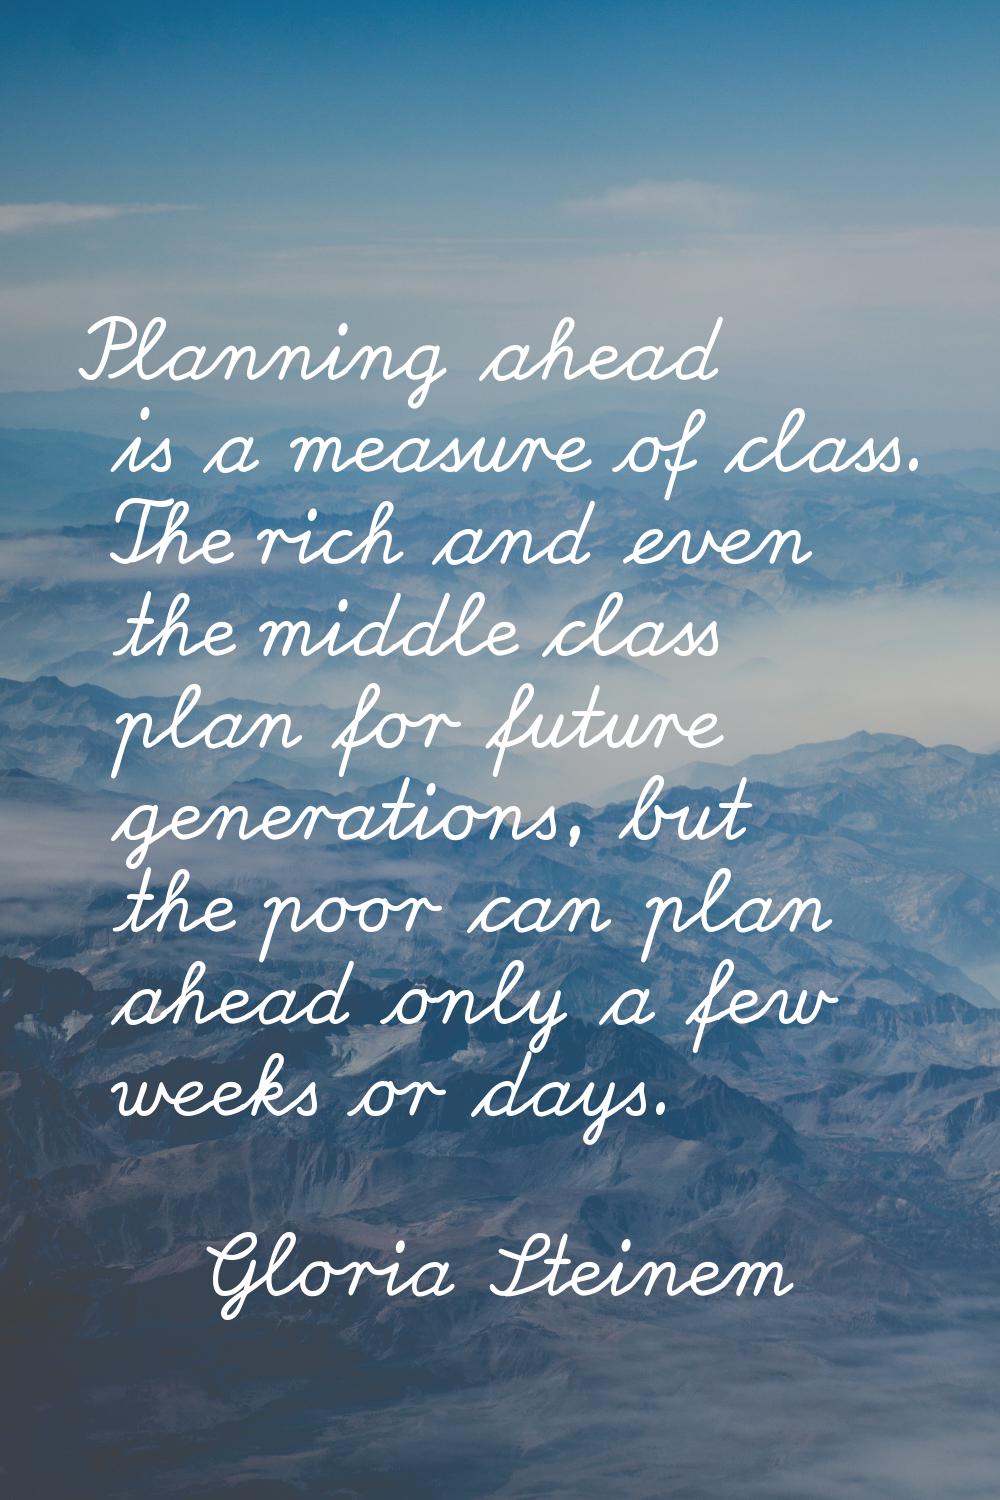 Planning ahead is a measure of class. The rich and even the middle class plan for future generation